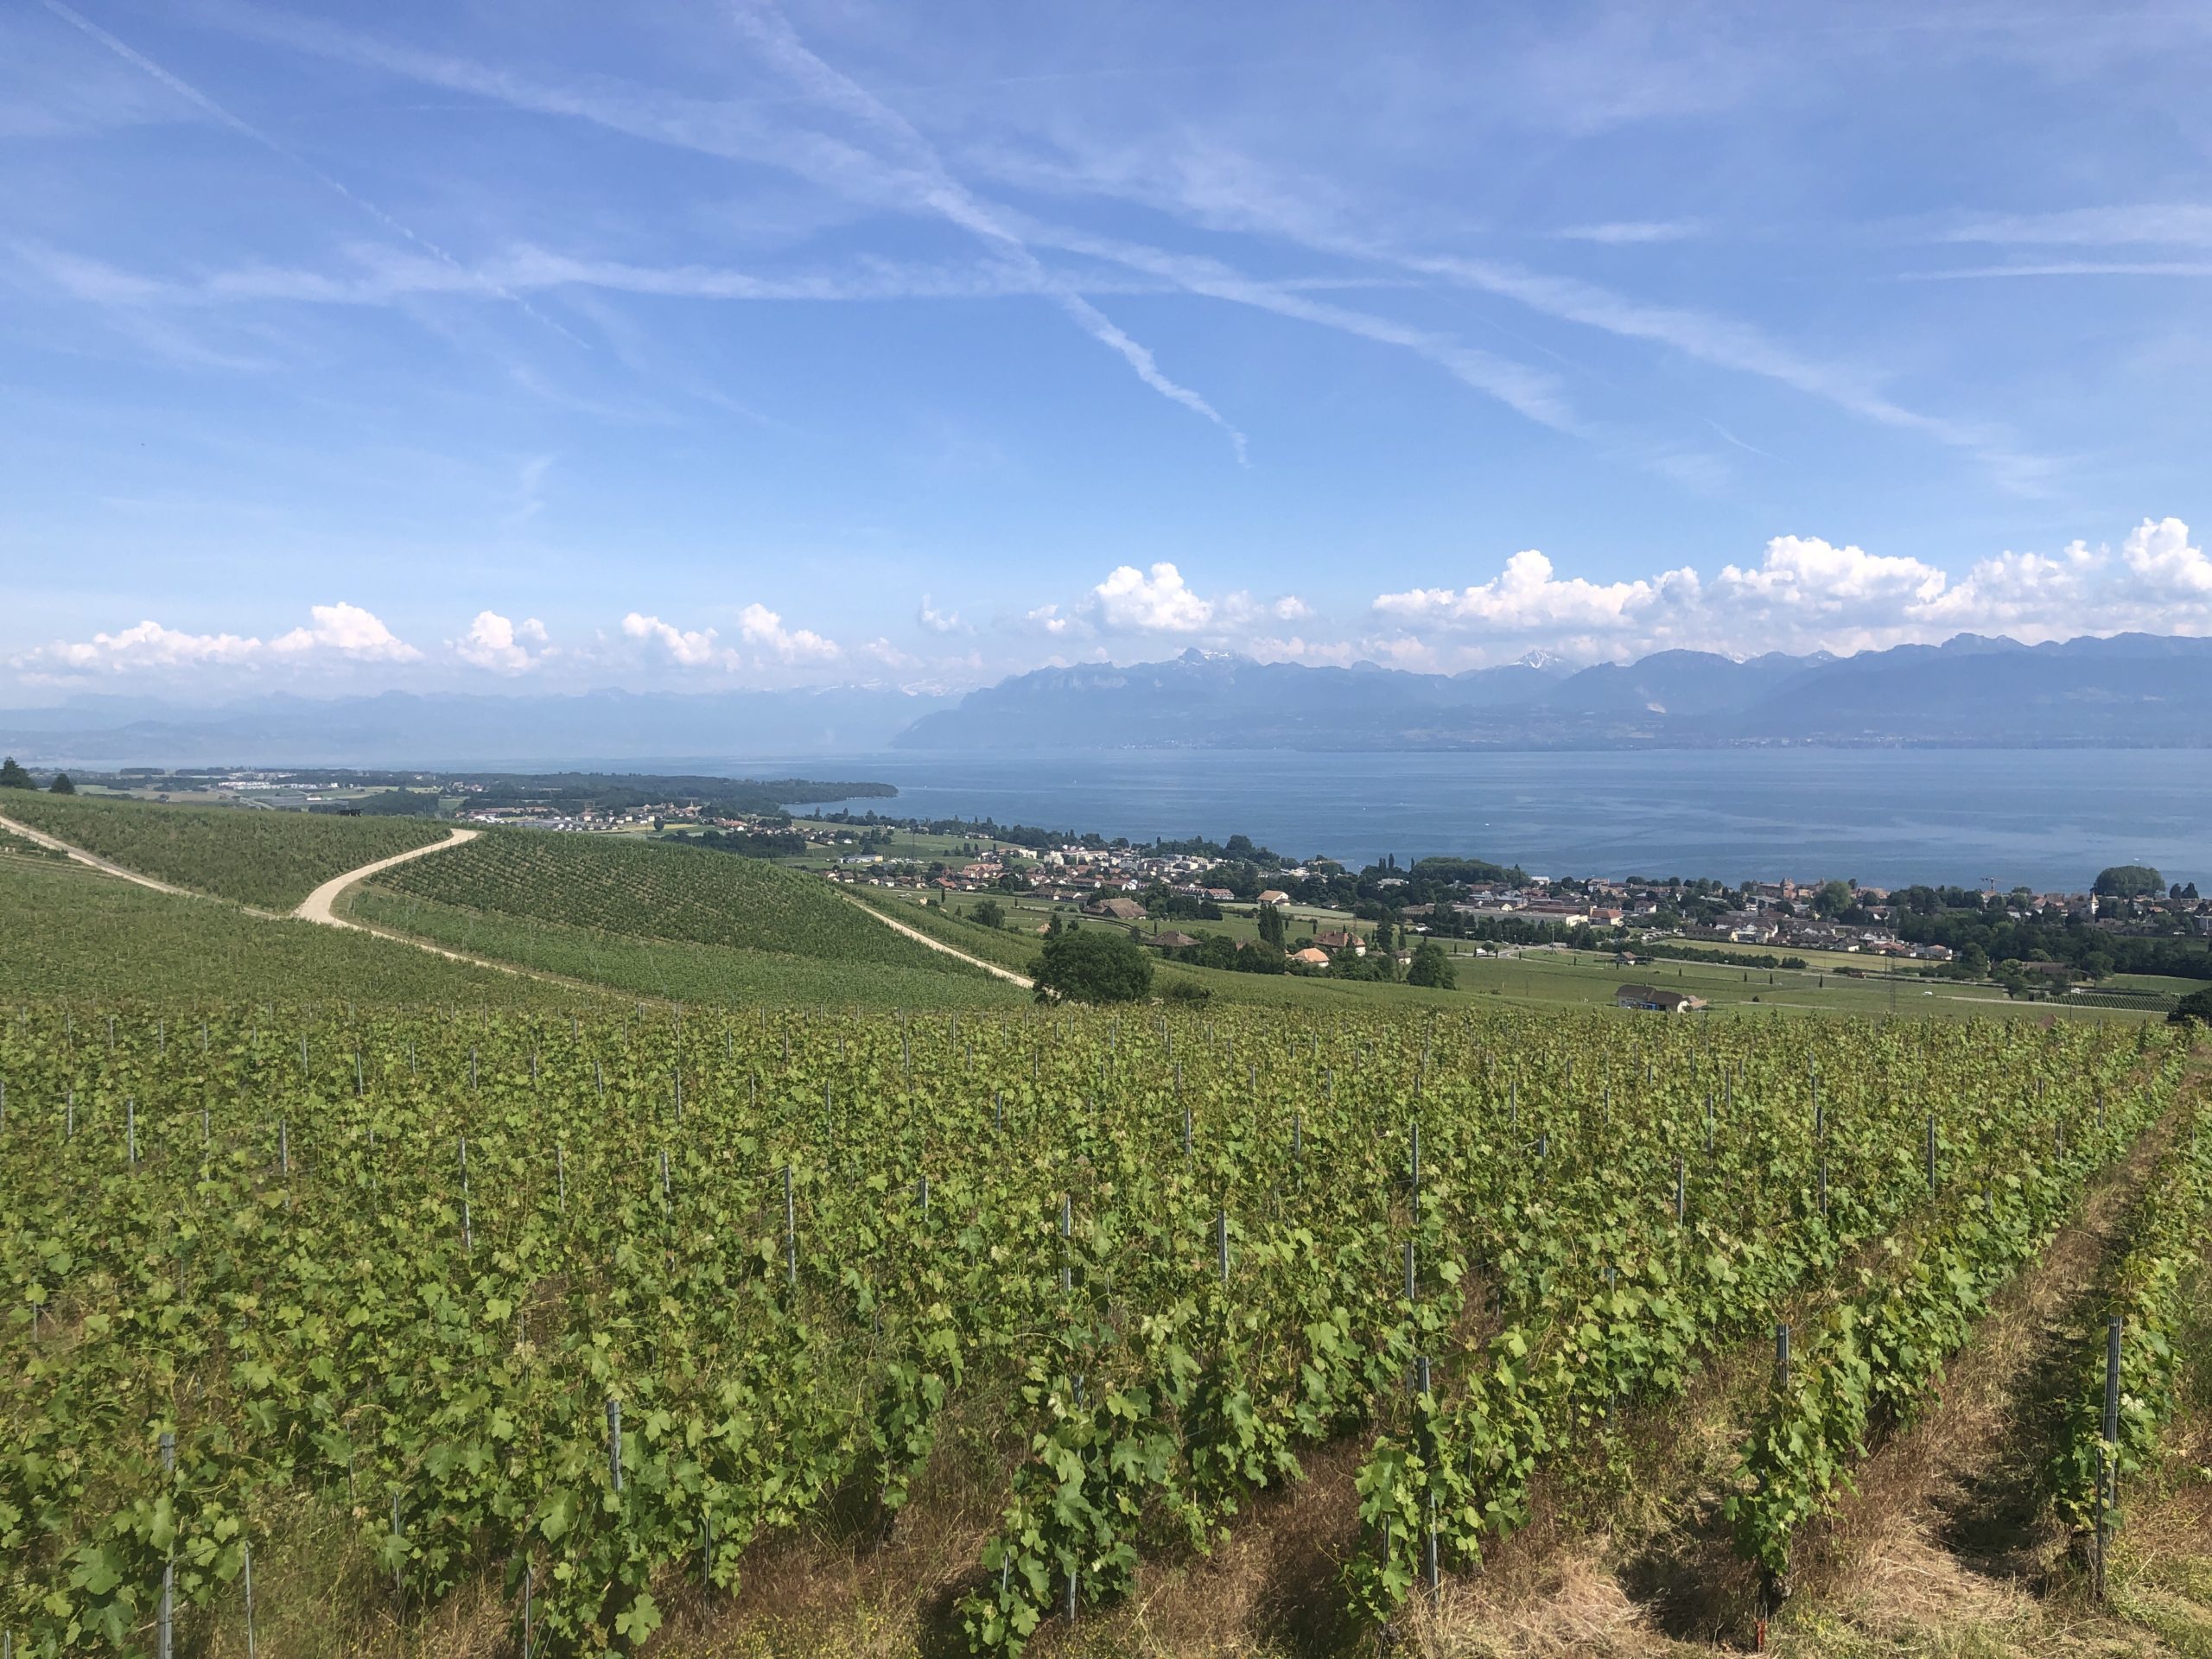 View of the Vineyards, towards Lausanne